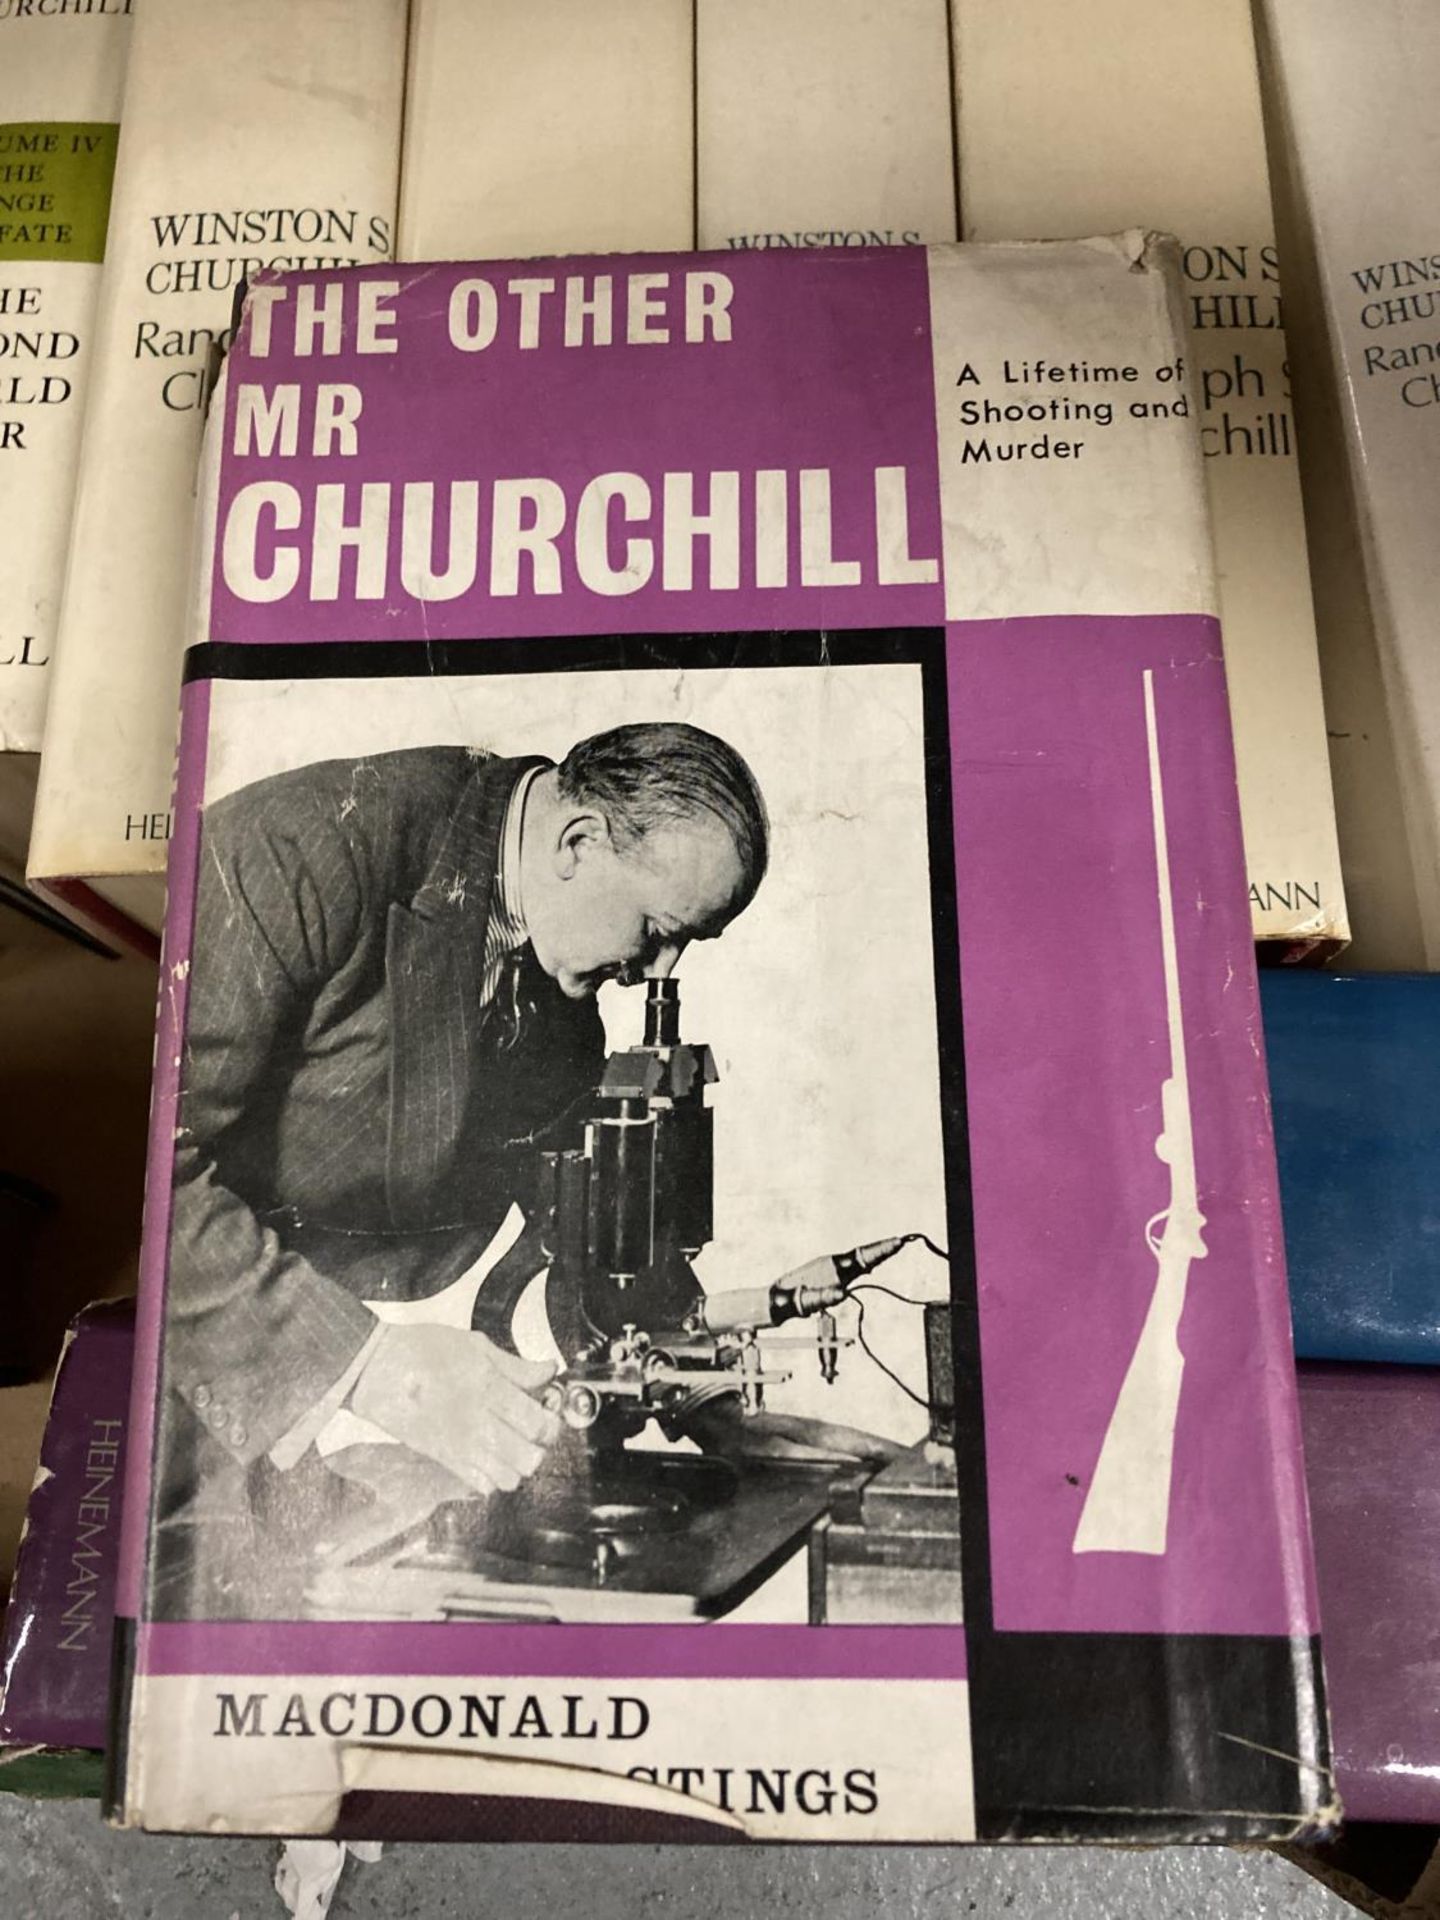 FOURTEEN BOOKS TO IJNCLUDE THIRTEEN WINSTON CHURCHILL AND A NEW IMPERIAL REFERENCE DICTIONARY - Image 2 of 5